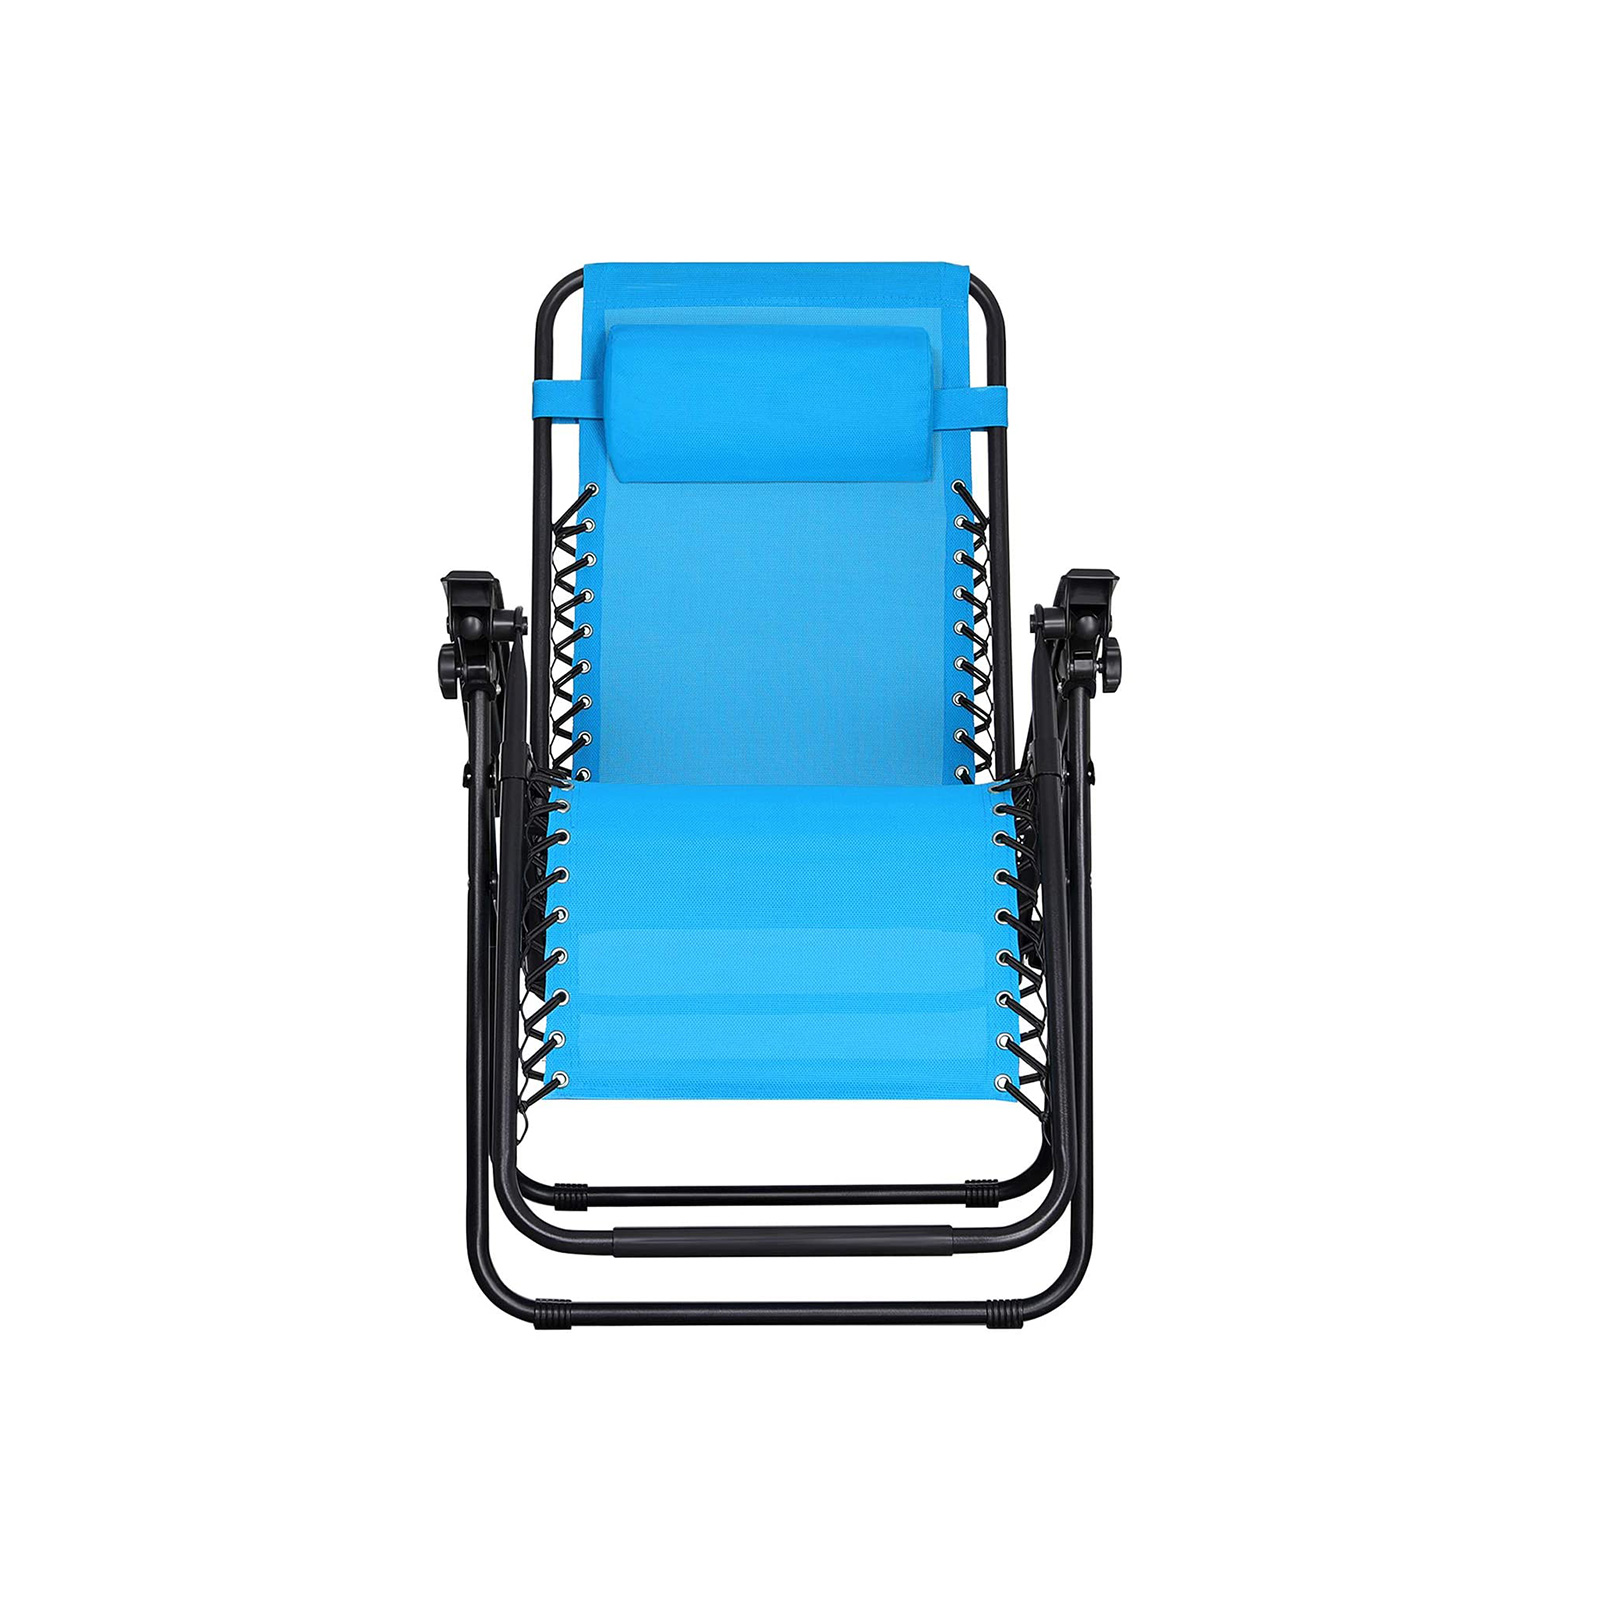 Blue Outdoor Lounge Chairs